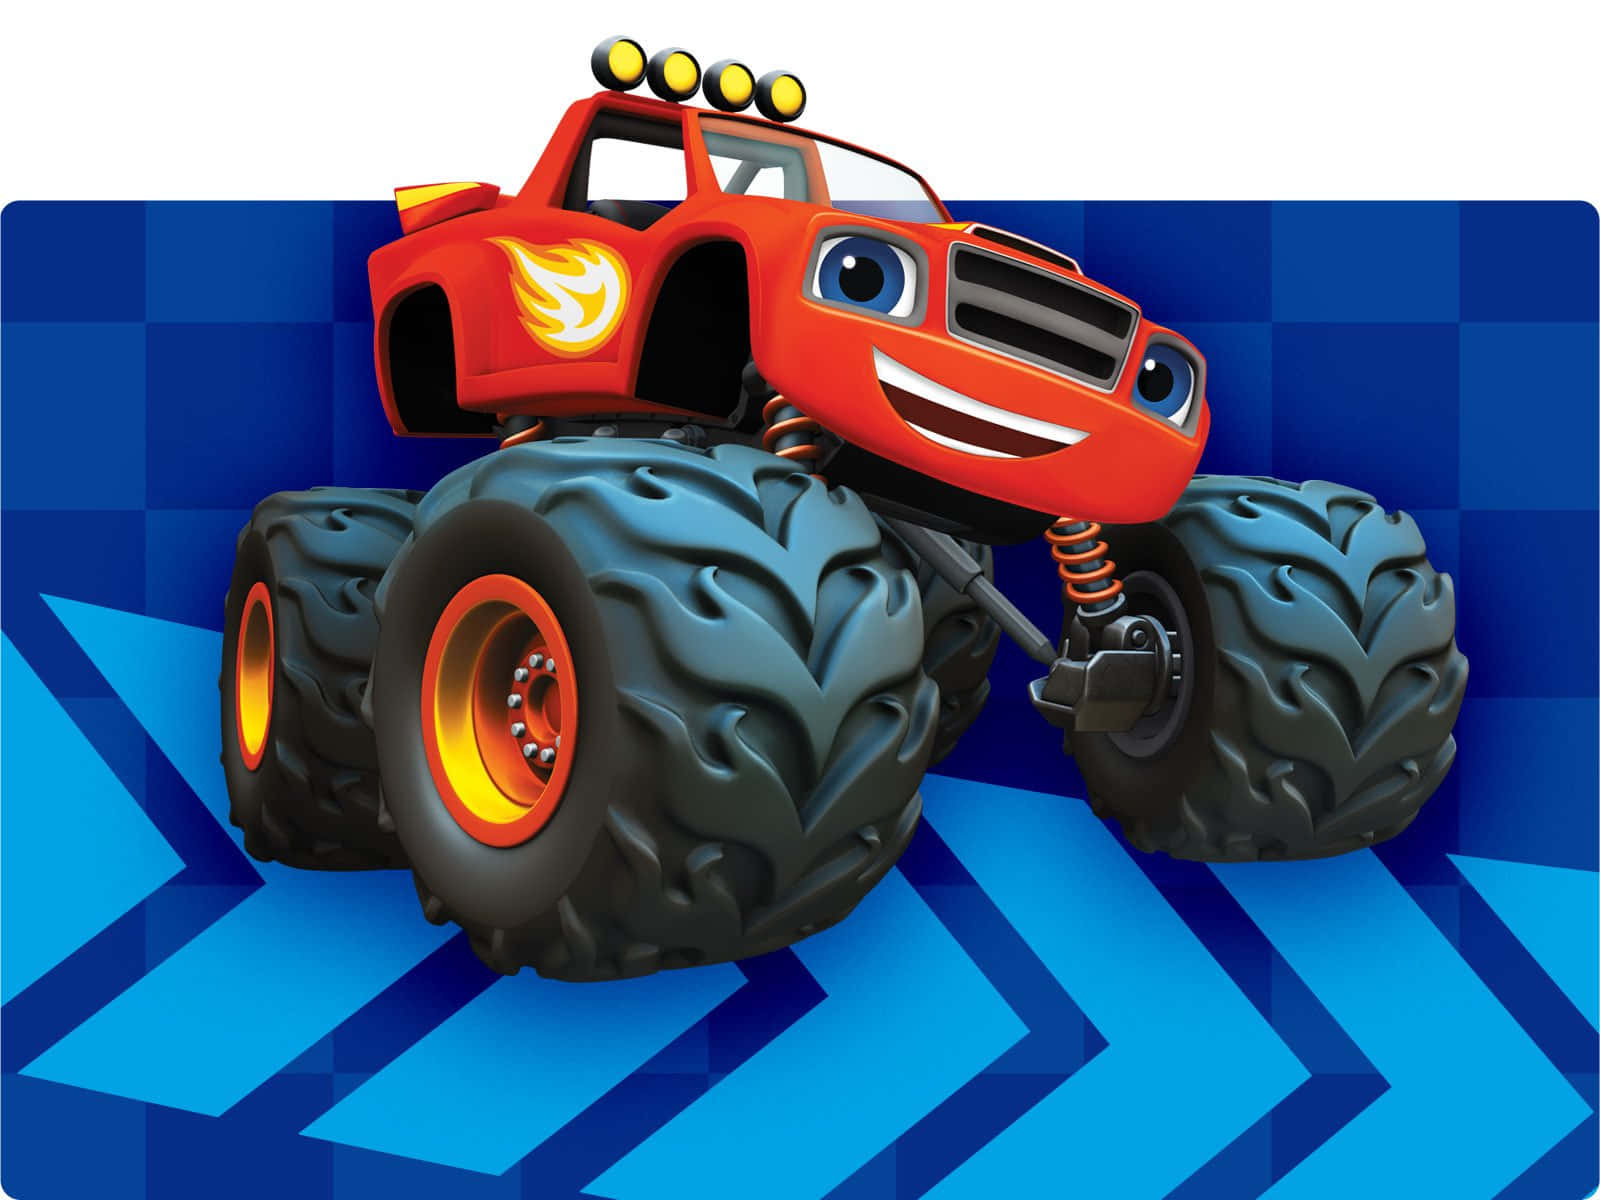 Revving with power, this intimidating Monster Truck is ready to take on any challenge!